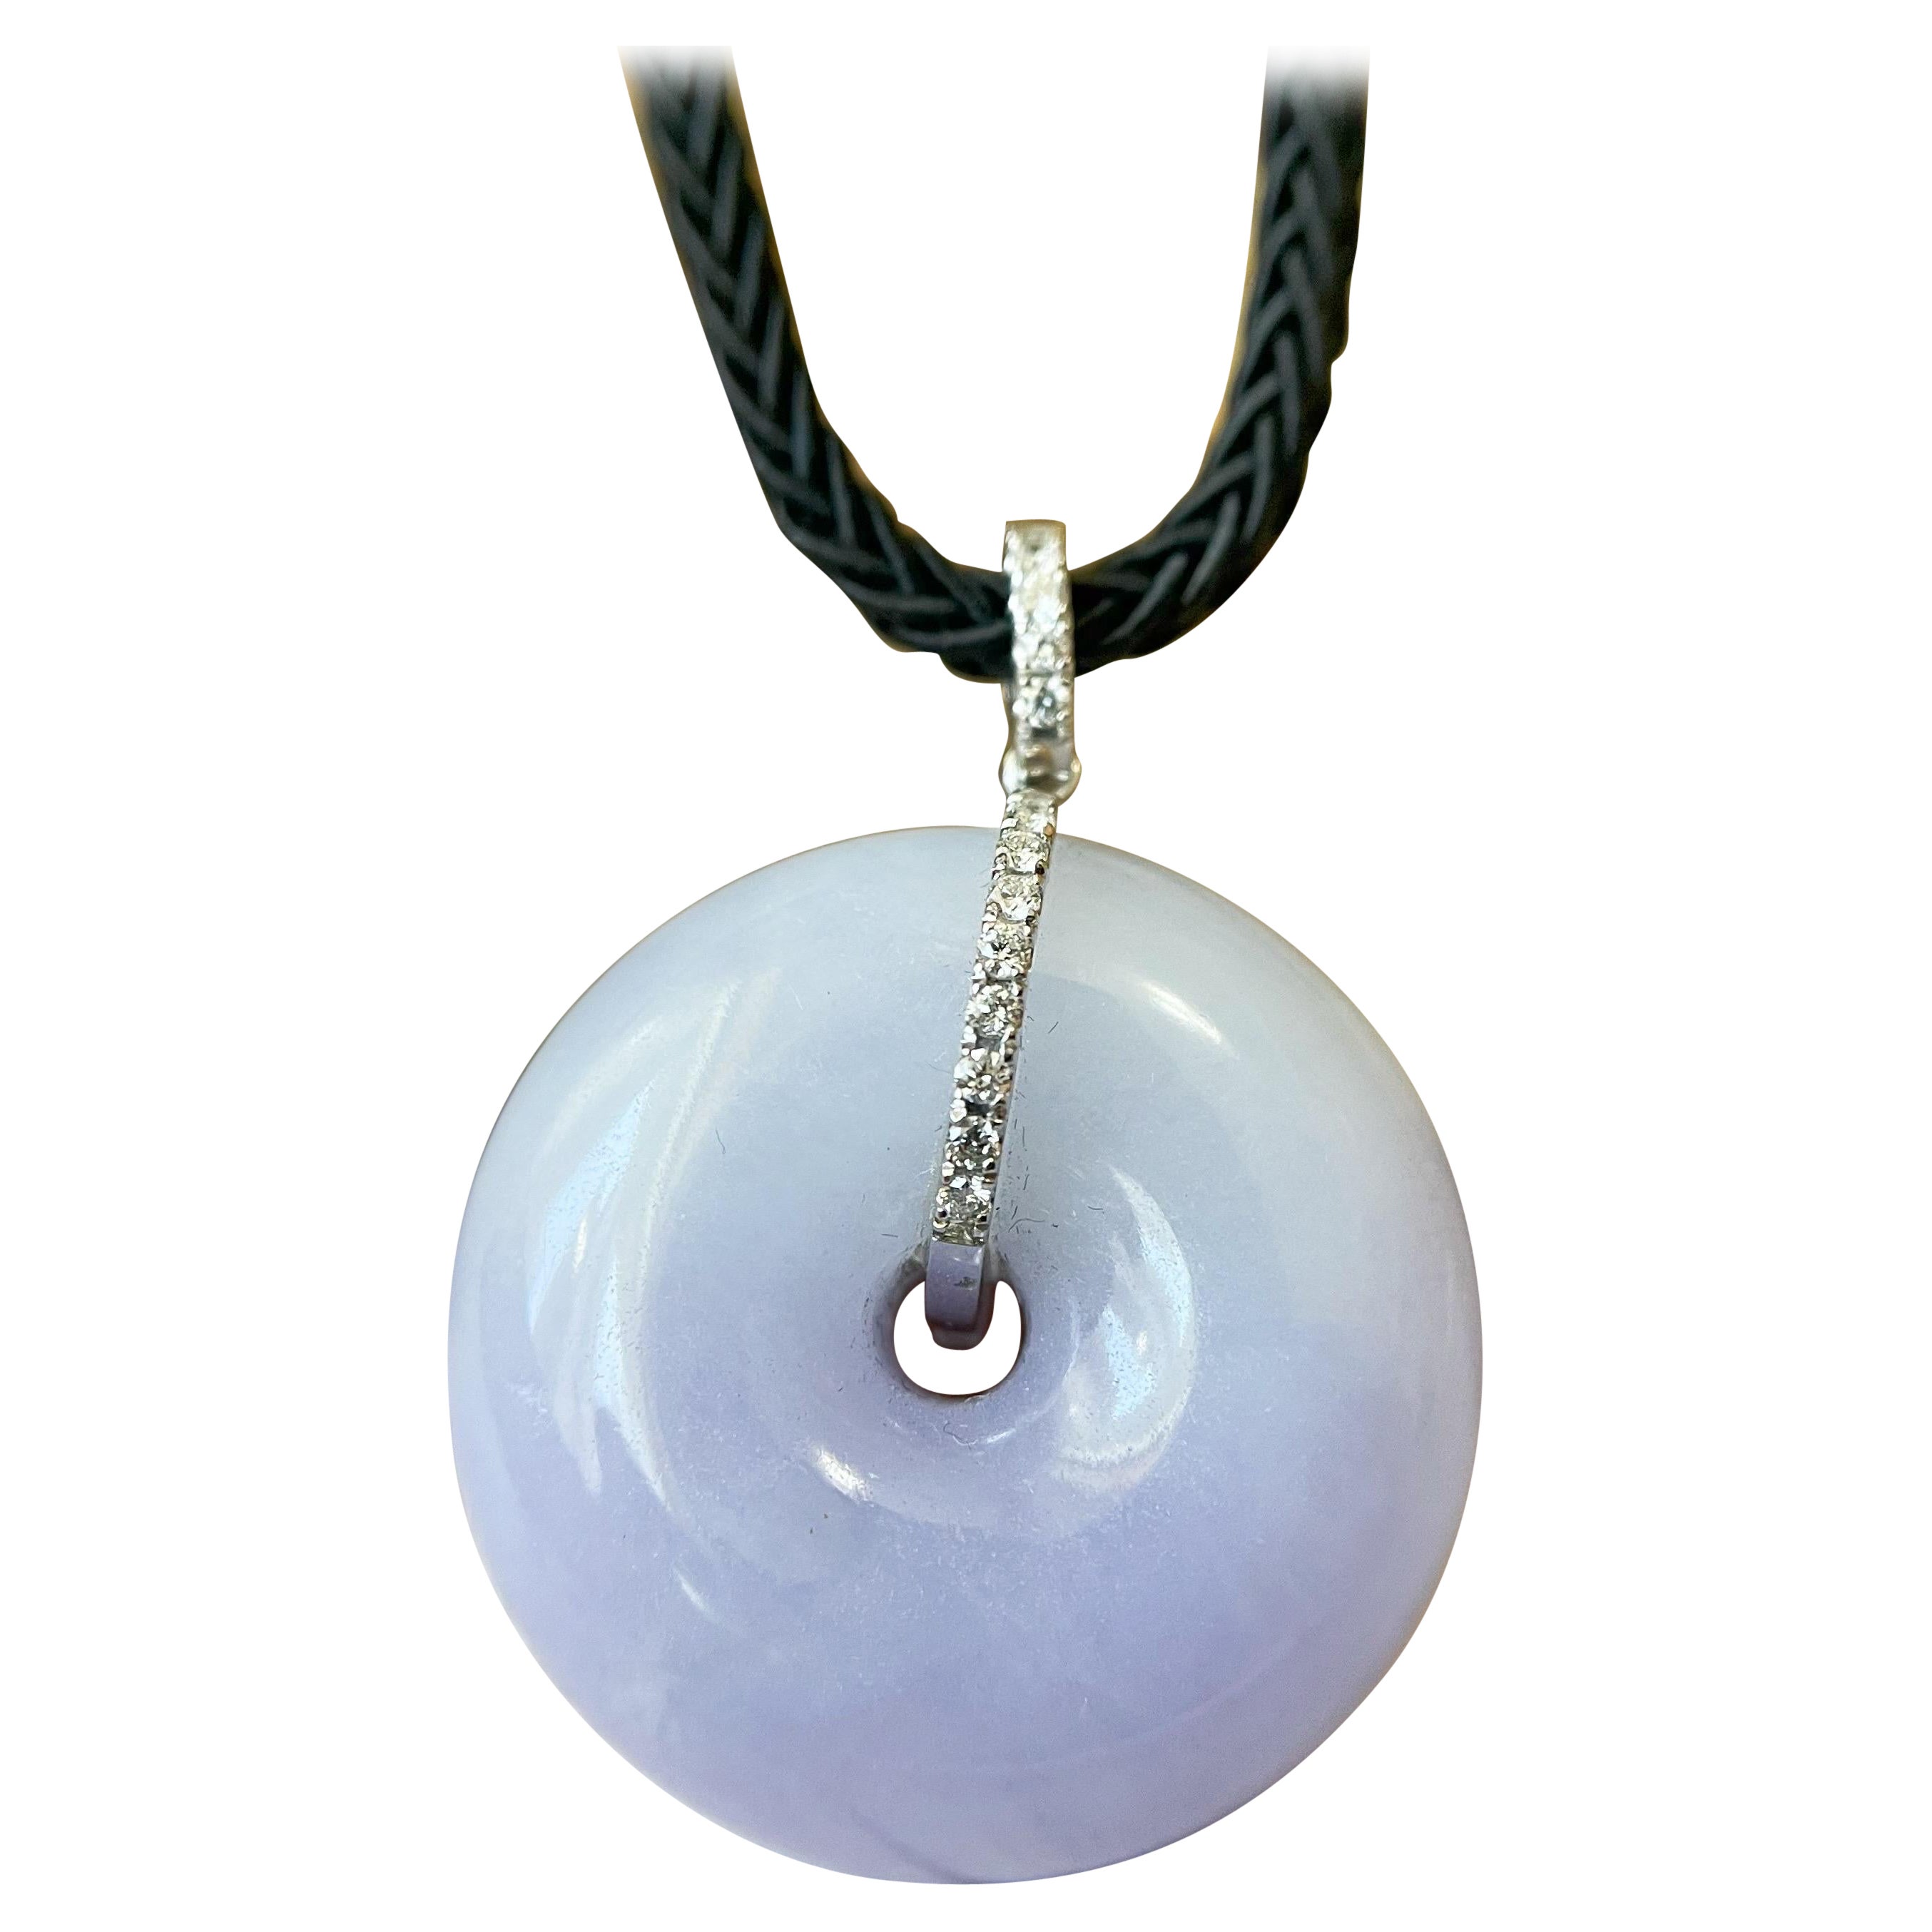 95.87 Ct - Natural Myanmar Lavender Icy Type Jadeite Donut Necklace For Sale